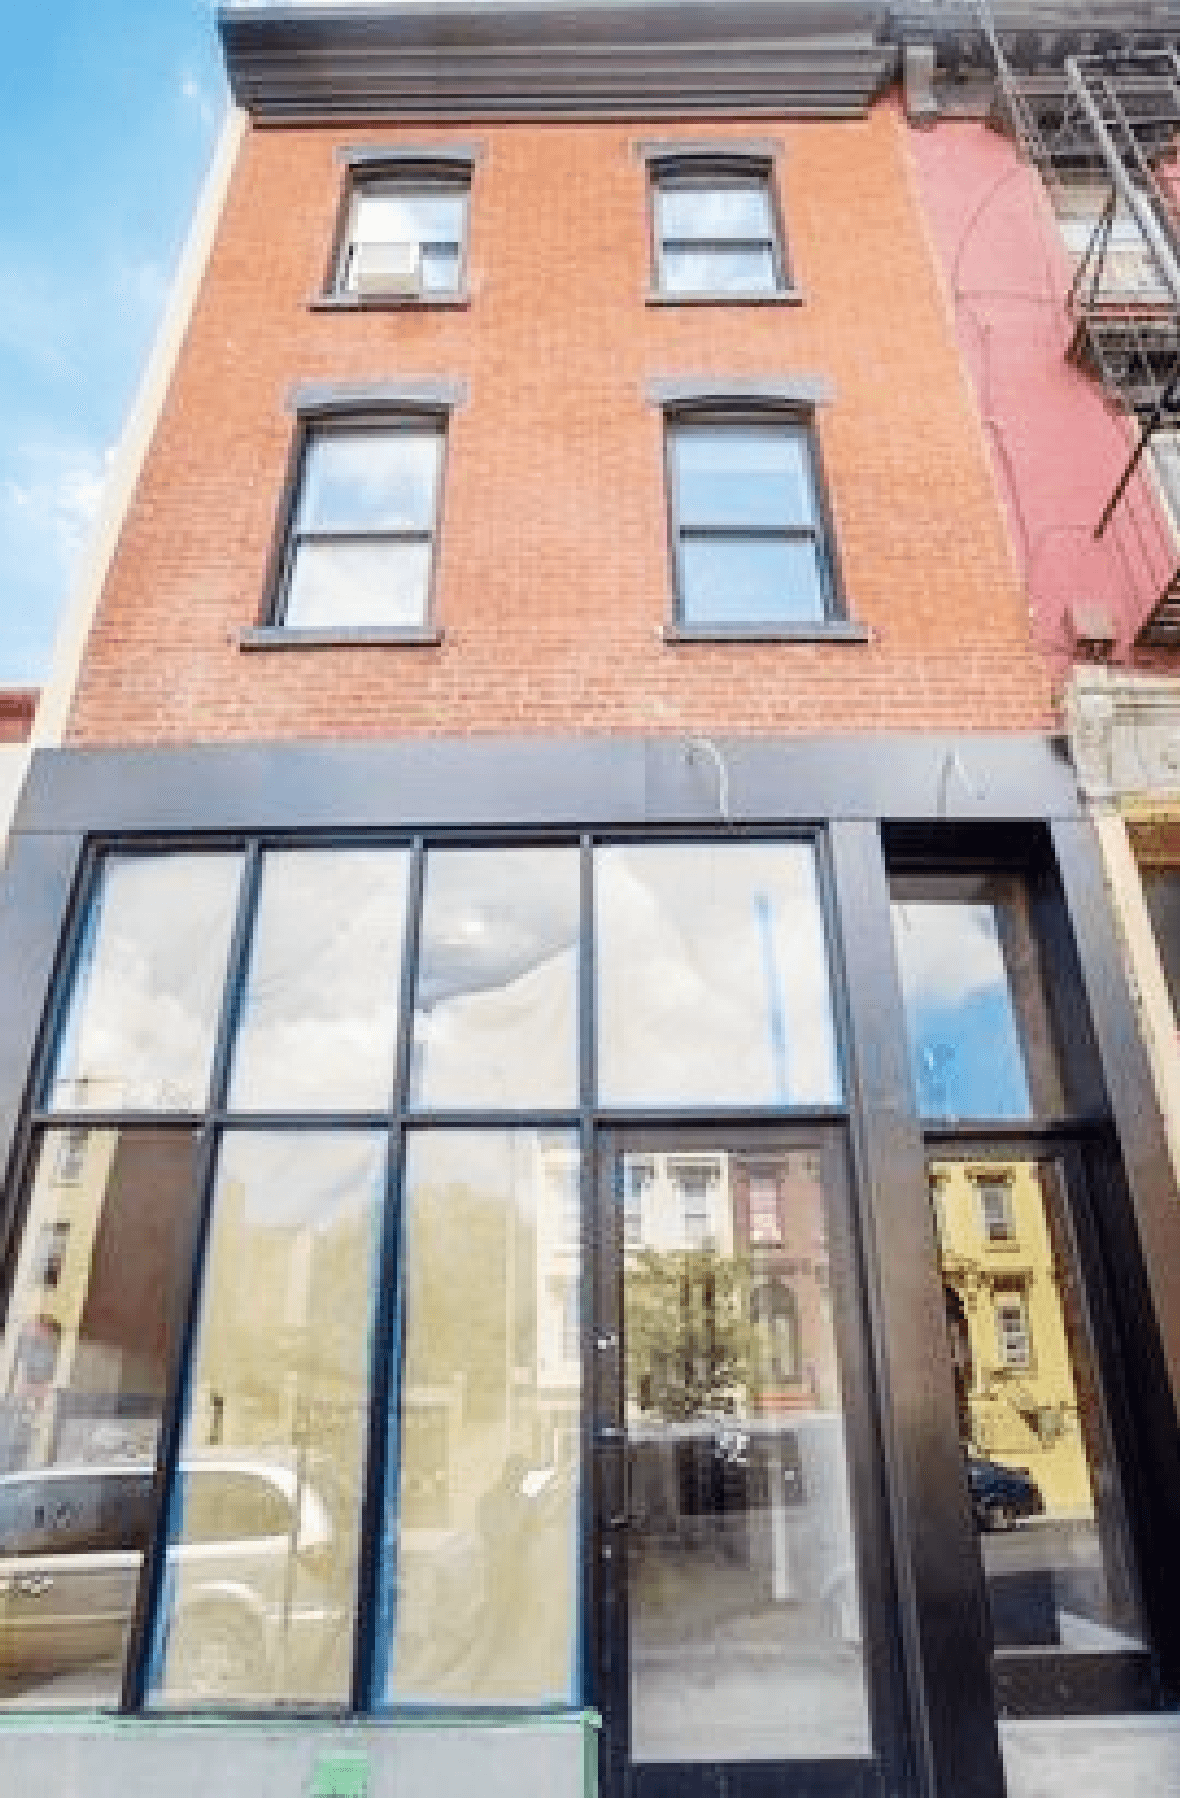 Three Story Mixed-Use Brick Building For Sale in Bed Stuy, Brooklyn